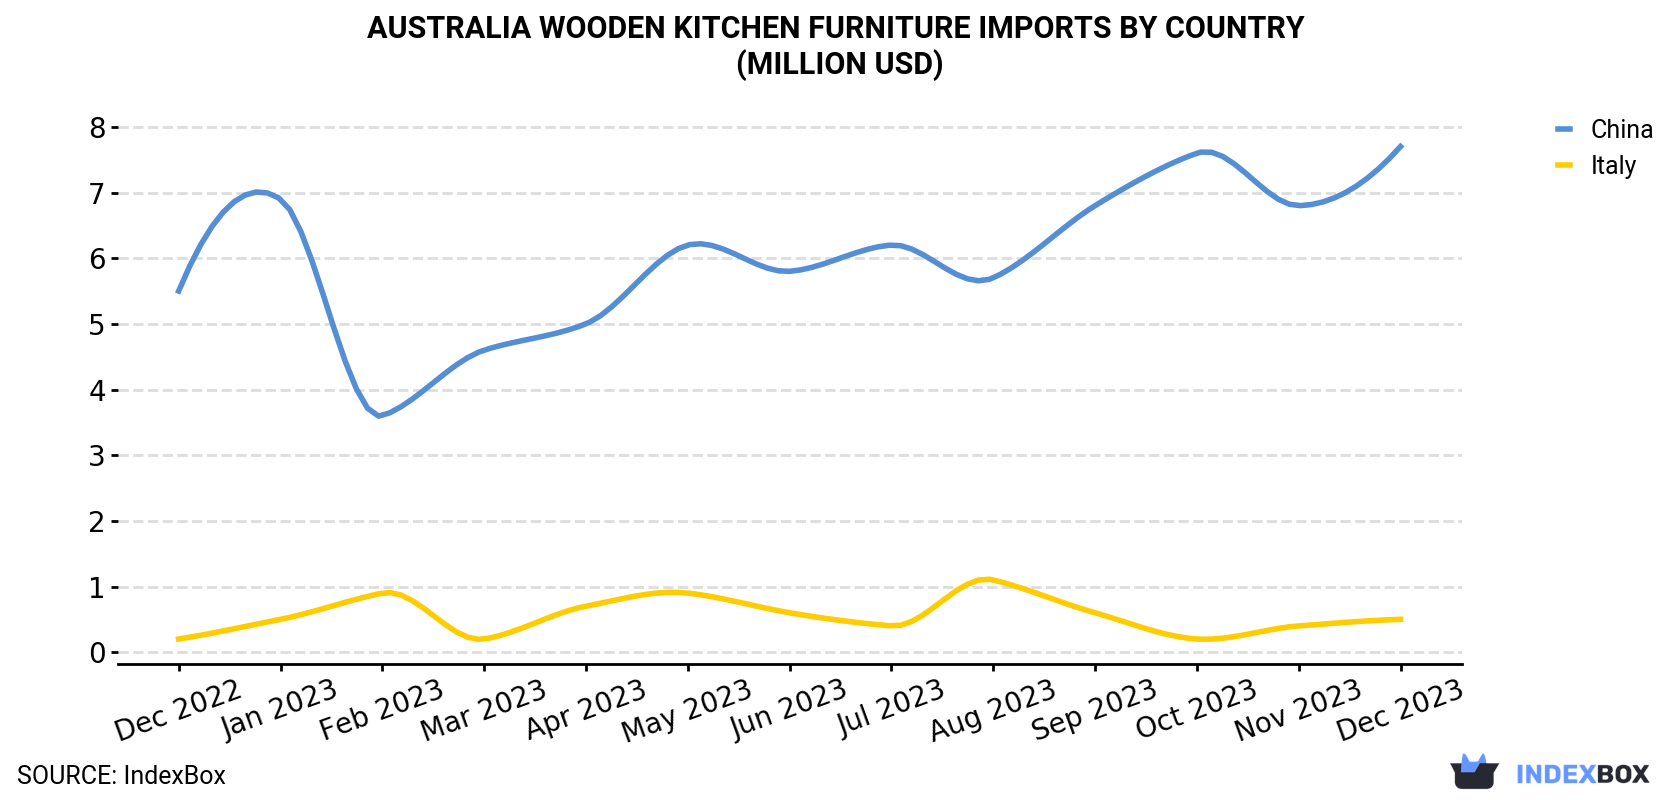 Australia Wooden Kitchen Furniture Imports By Country (Million USD)